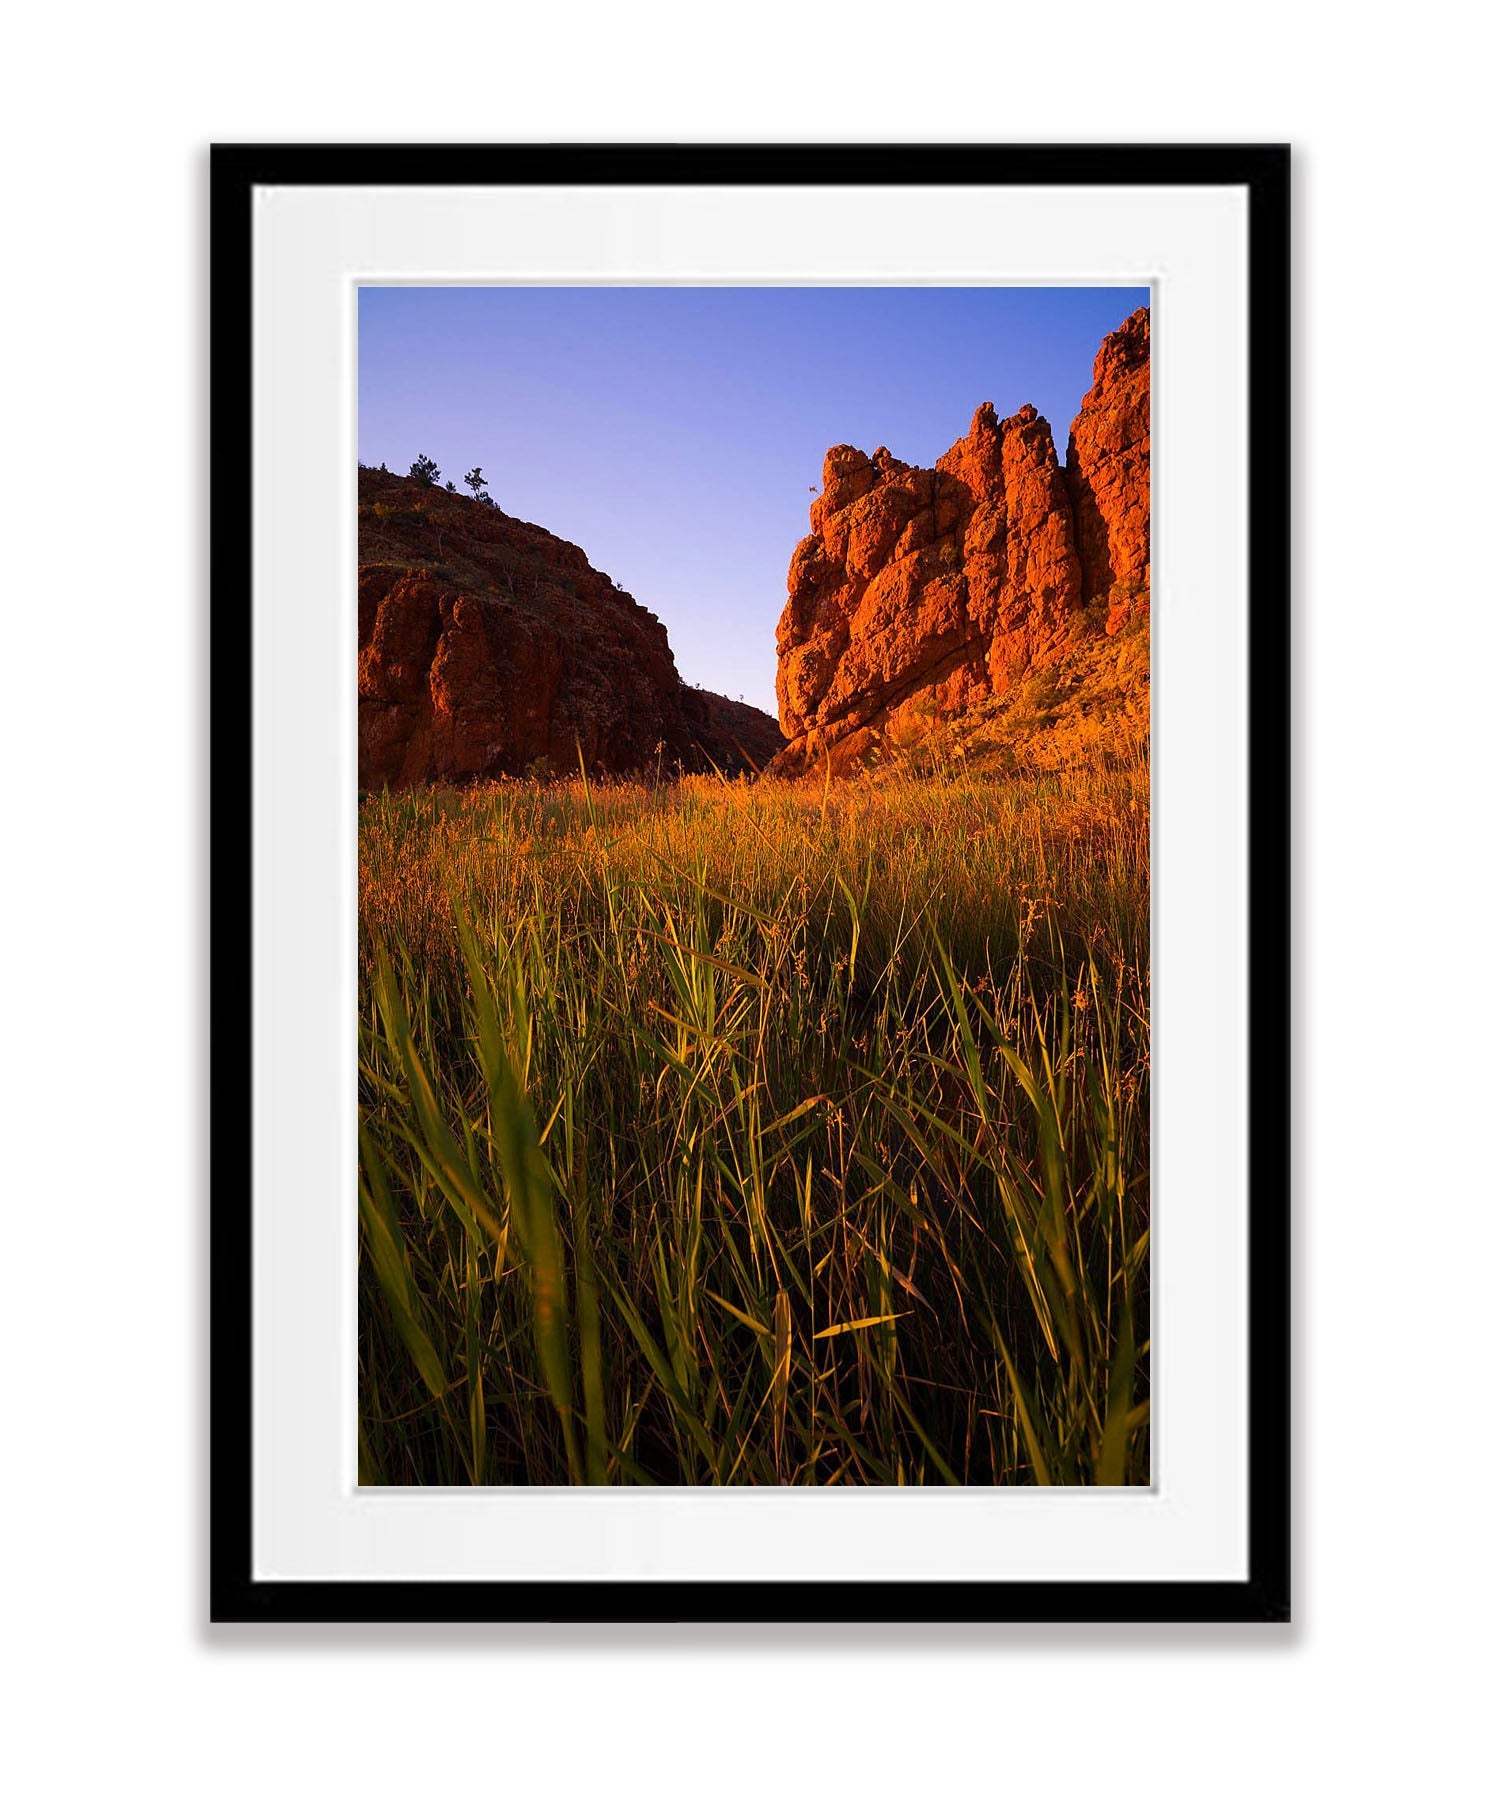 Glen Helen Gorge reed bed, West MacDonnell Ranges - Northern Territory